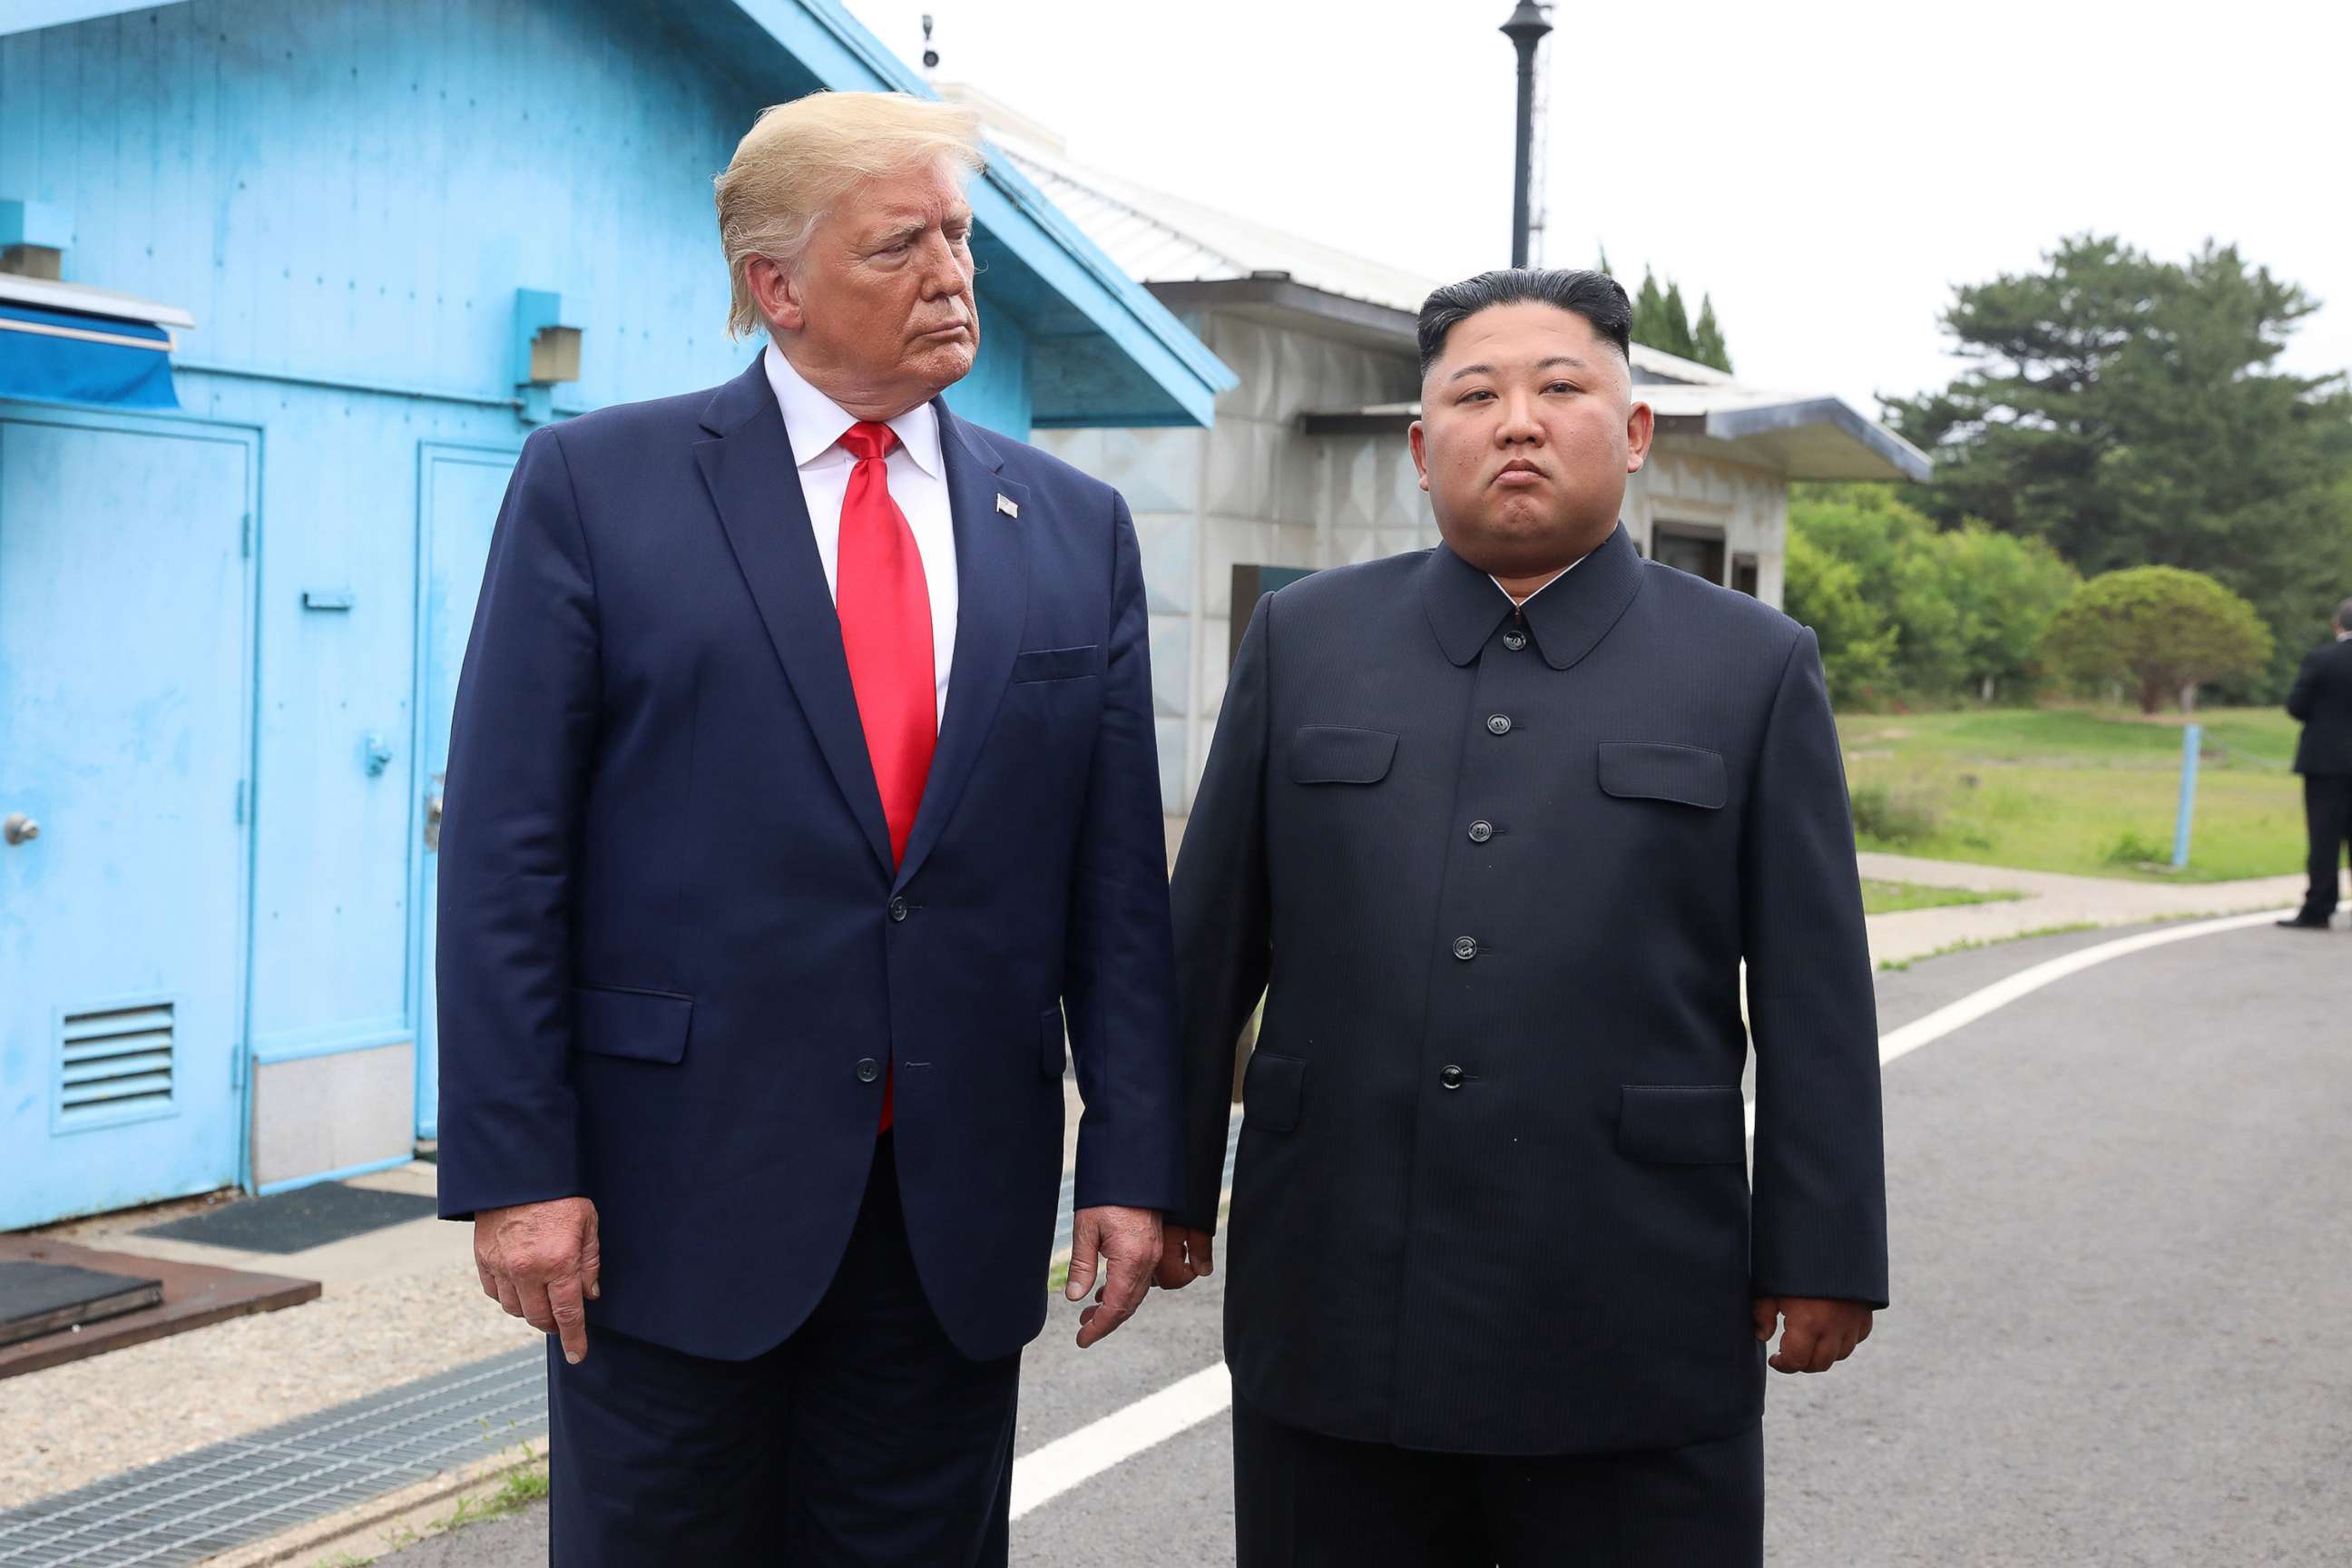 PHOTO: President Donald Trum and North Korean leader Kim Jong Un meet in the demilitarized zone (DMZ) separating the South and North Korea on June 30, 2019 in Panmunjom, South Korea.